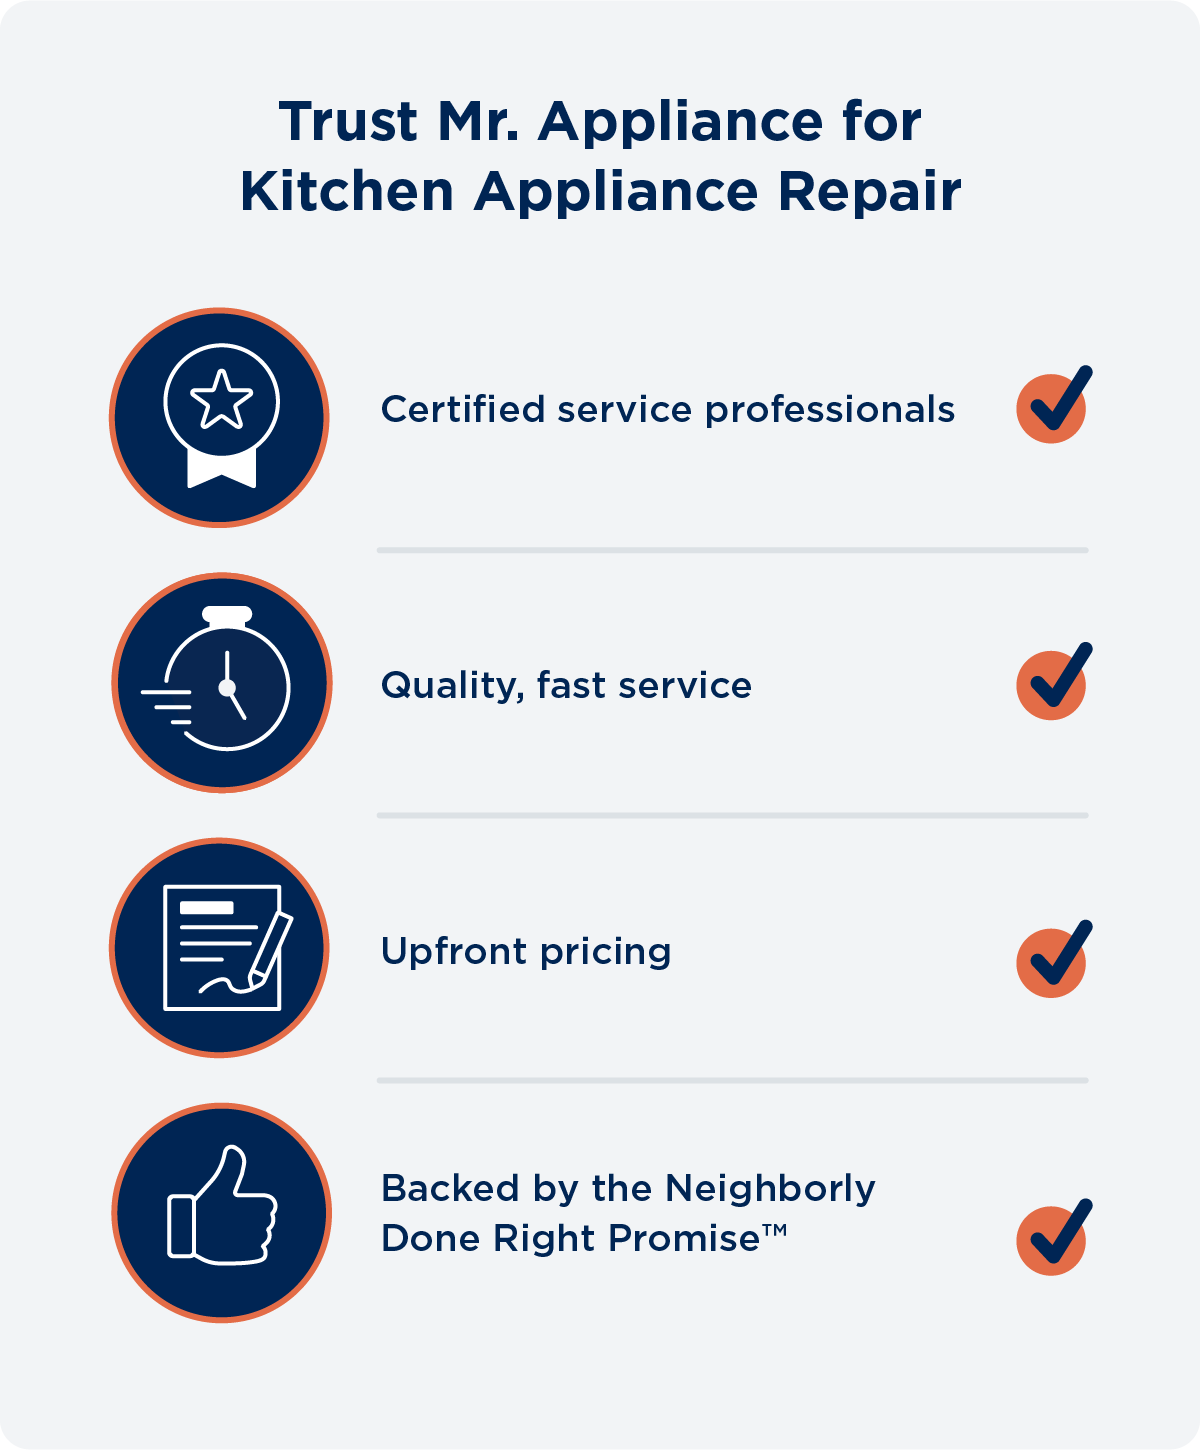 Mr. Appliance Repairs offers certified service professionals, quality service, upfront pricing, and the Neighborly Done Right Promise™